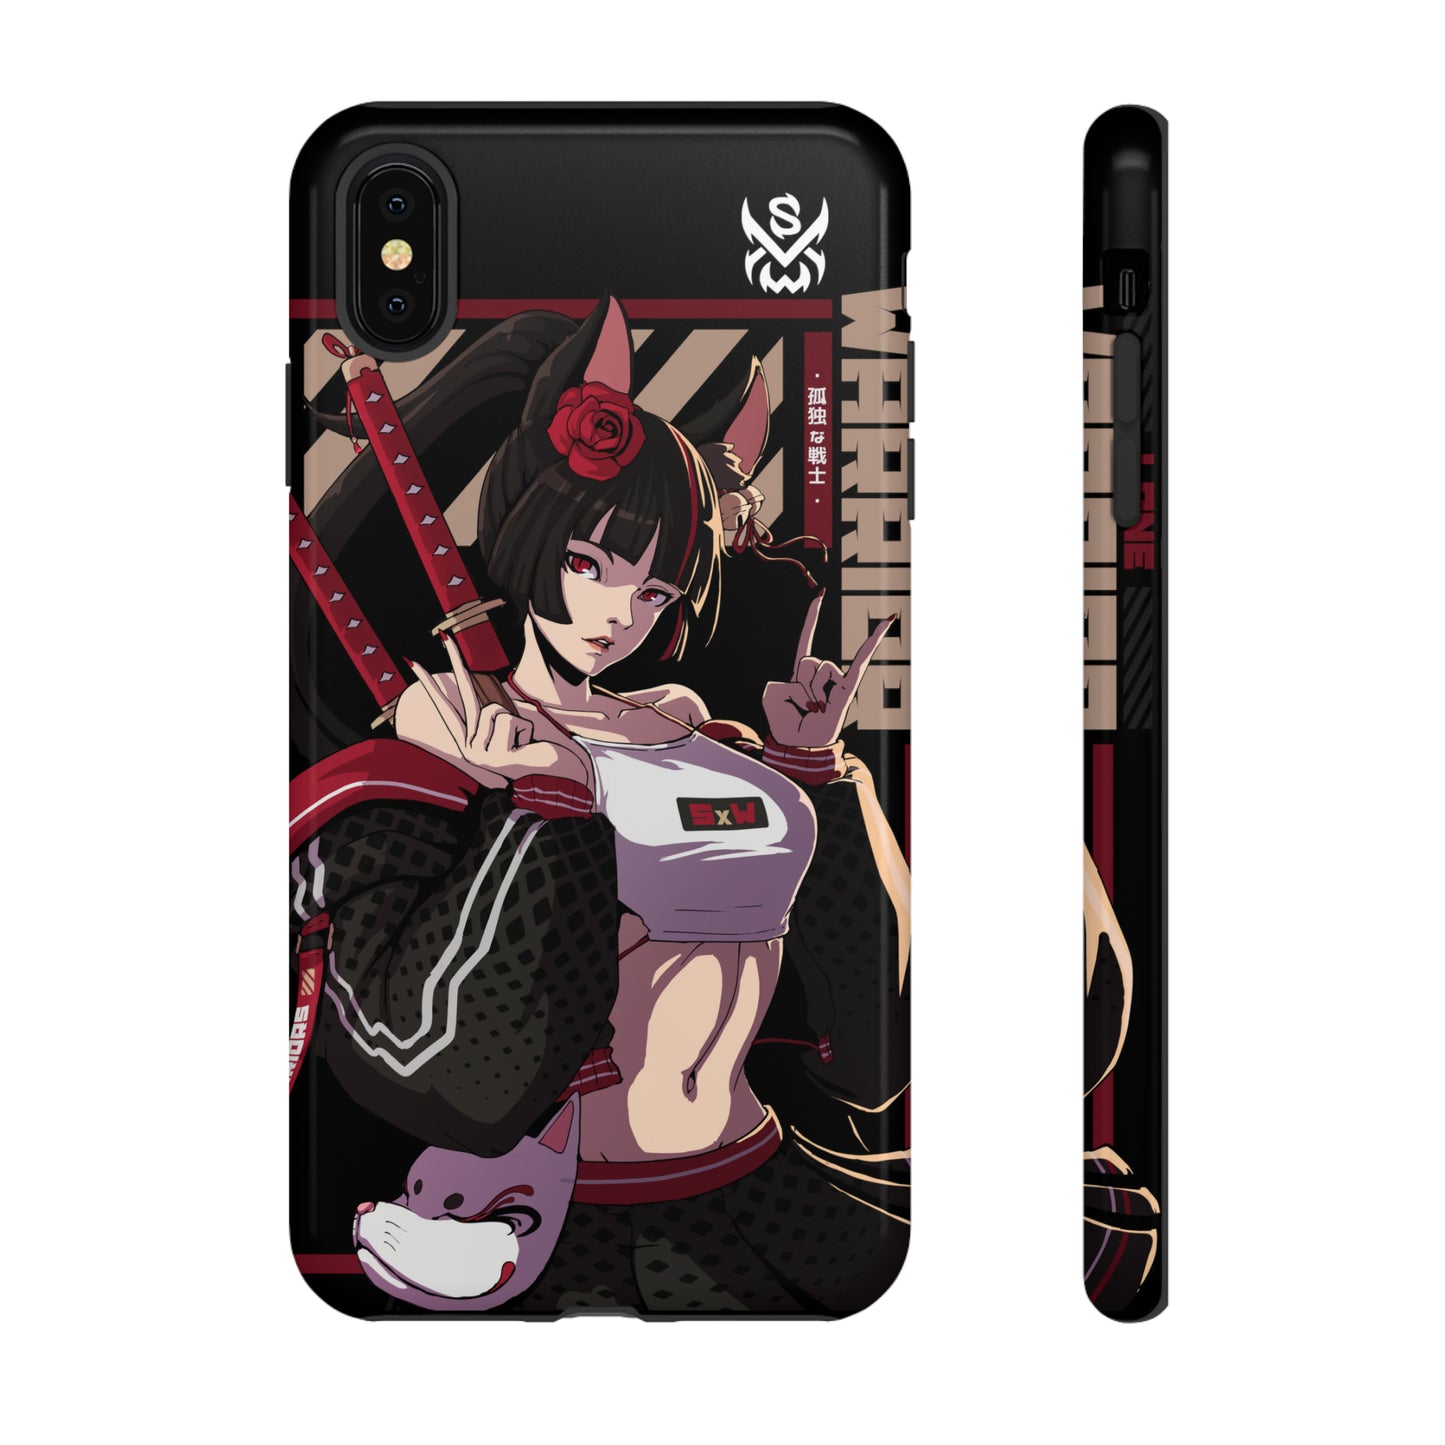 Lone Warrior / iPhone Case - LIMITED